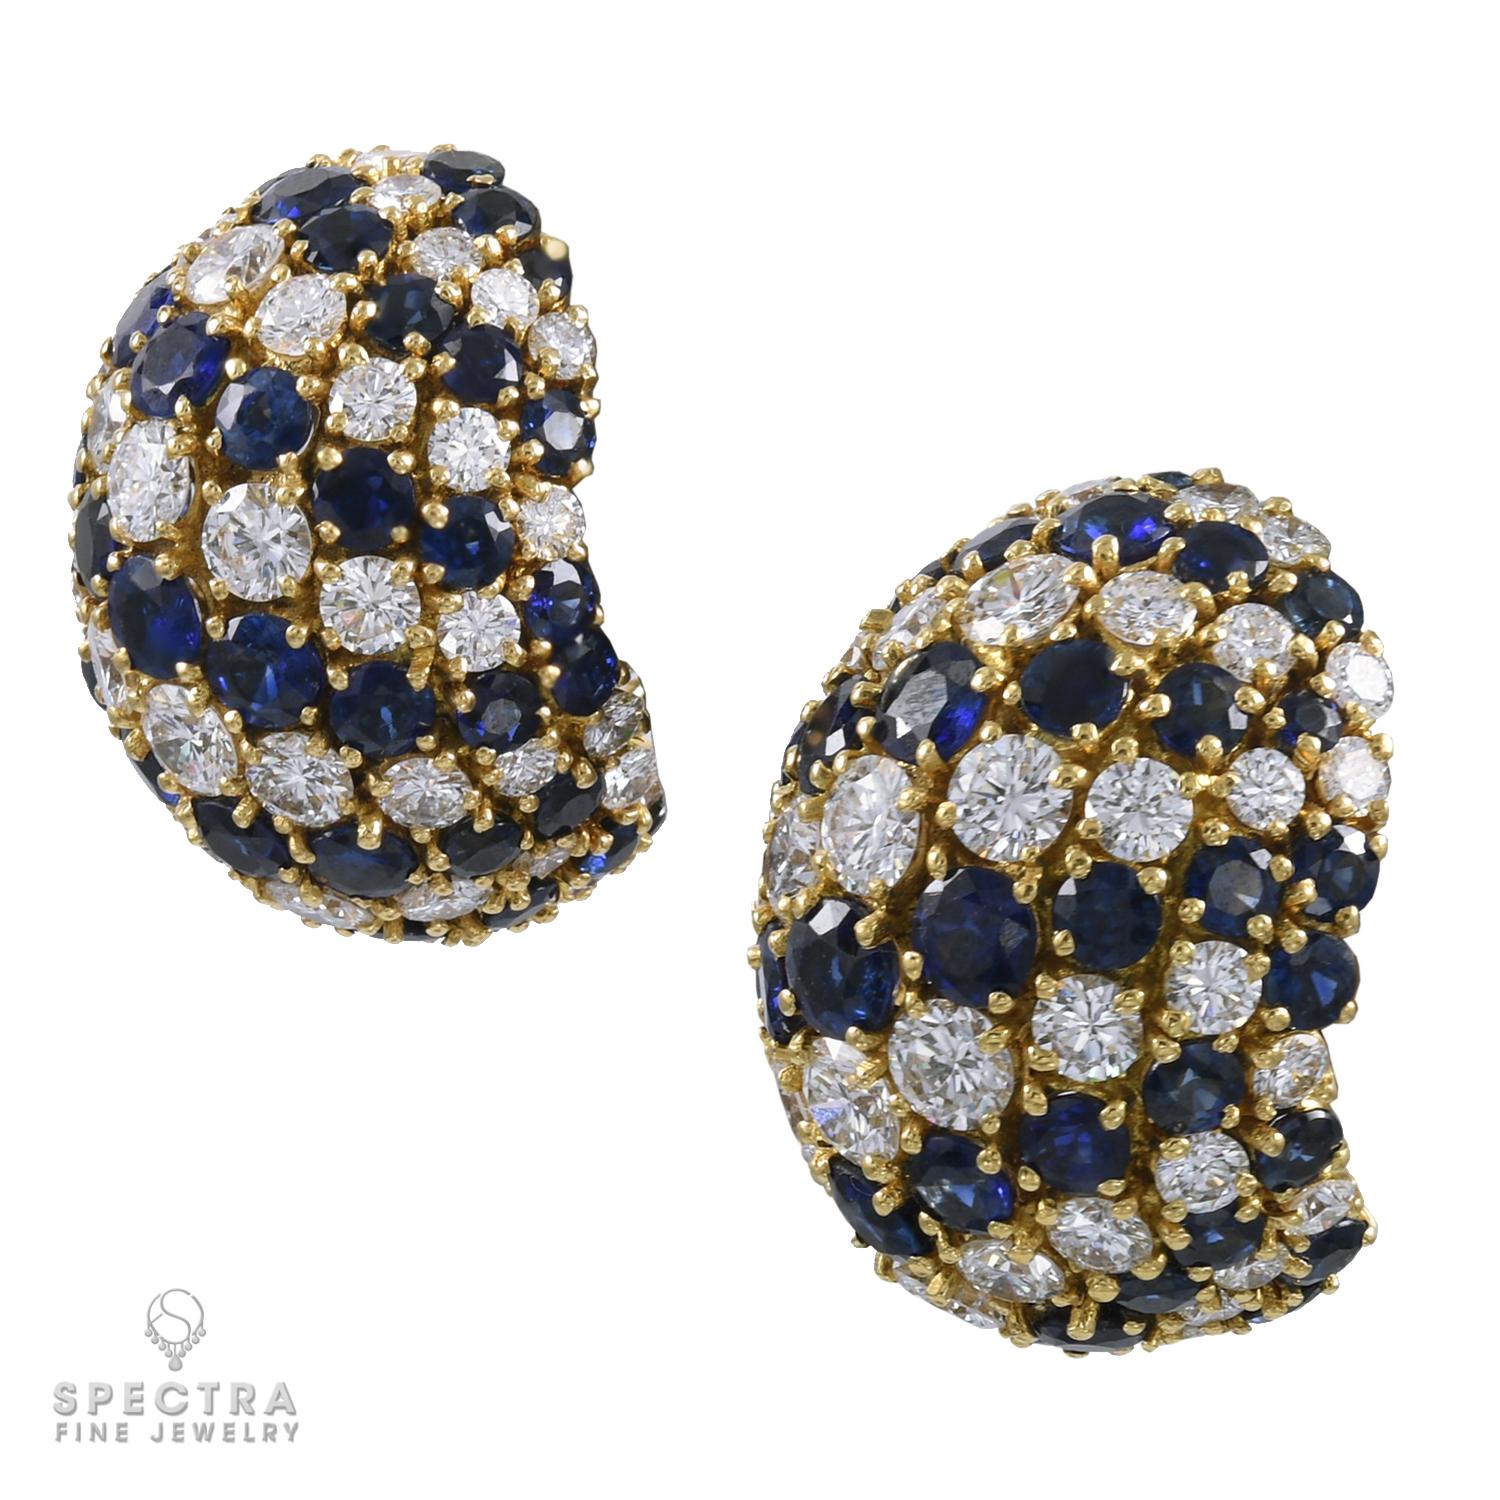 This symmetrical mirror image pair of Sapphire and Diamond Bombé Button Earrings made in the Contemporary era, 21st century, are crafted in 18K yellow gold, and feature diagonal stripes of round brilliant-cut blue sapphires with an estimated weight